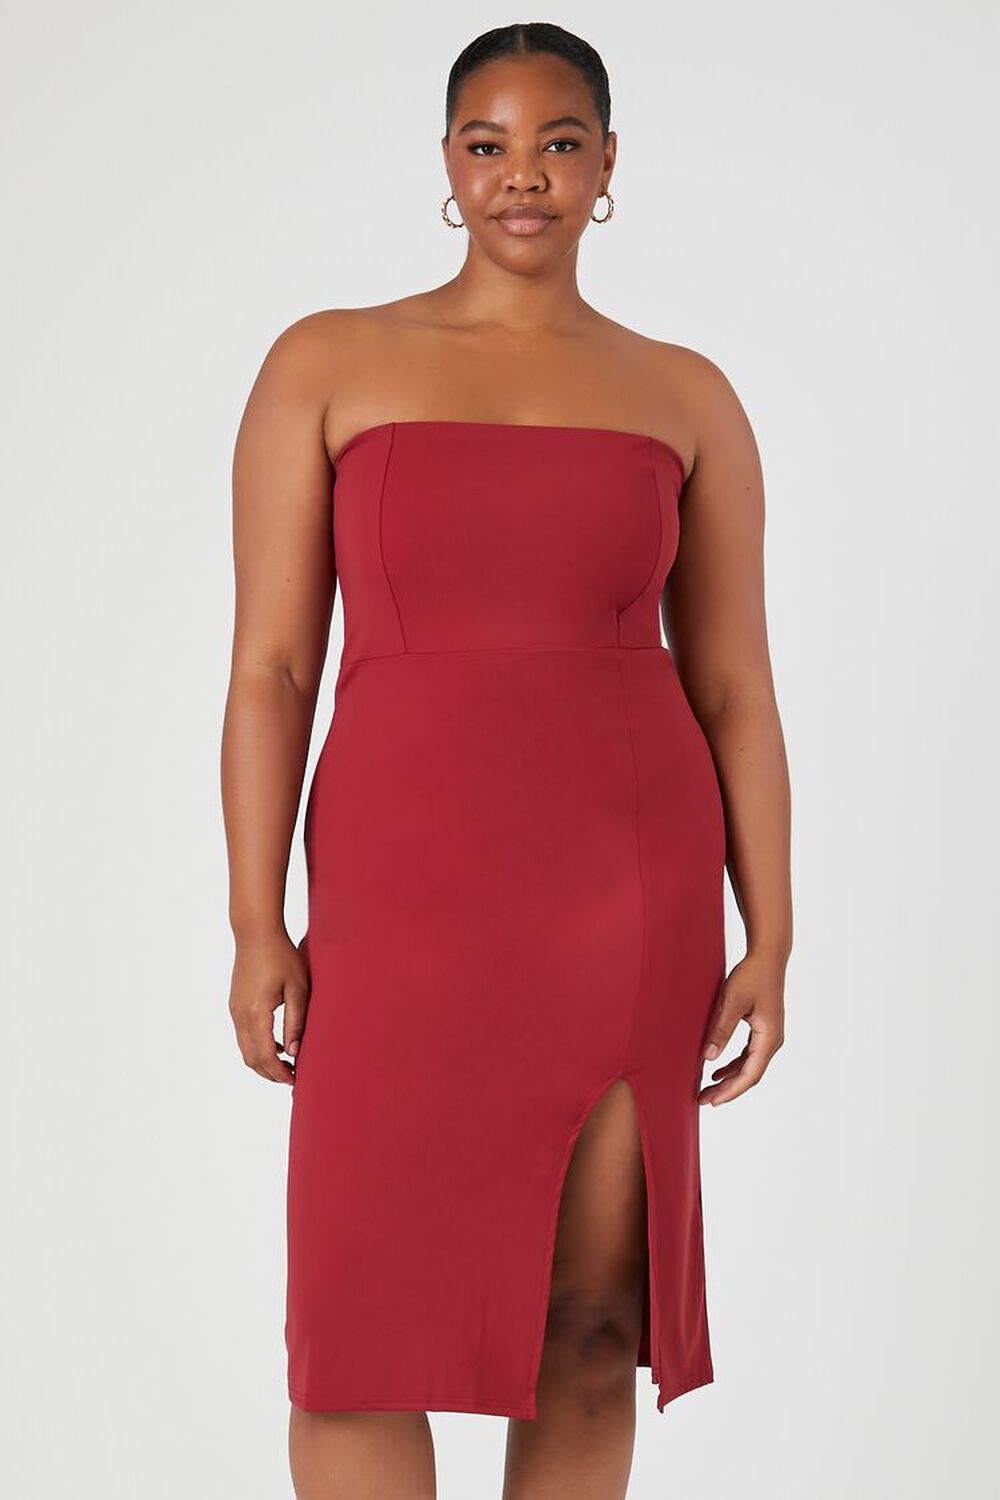 Tamara Ruched Dress in Black  Plus size outfits, Plus size clubwear, Plus  size dresses